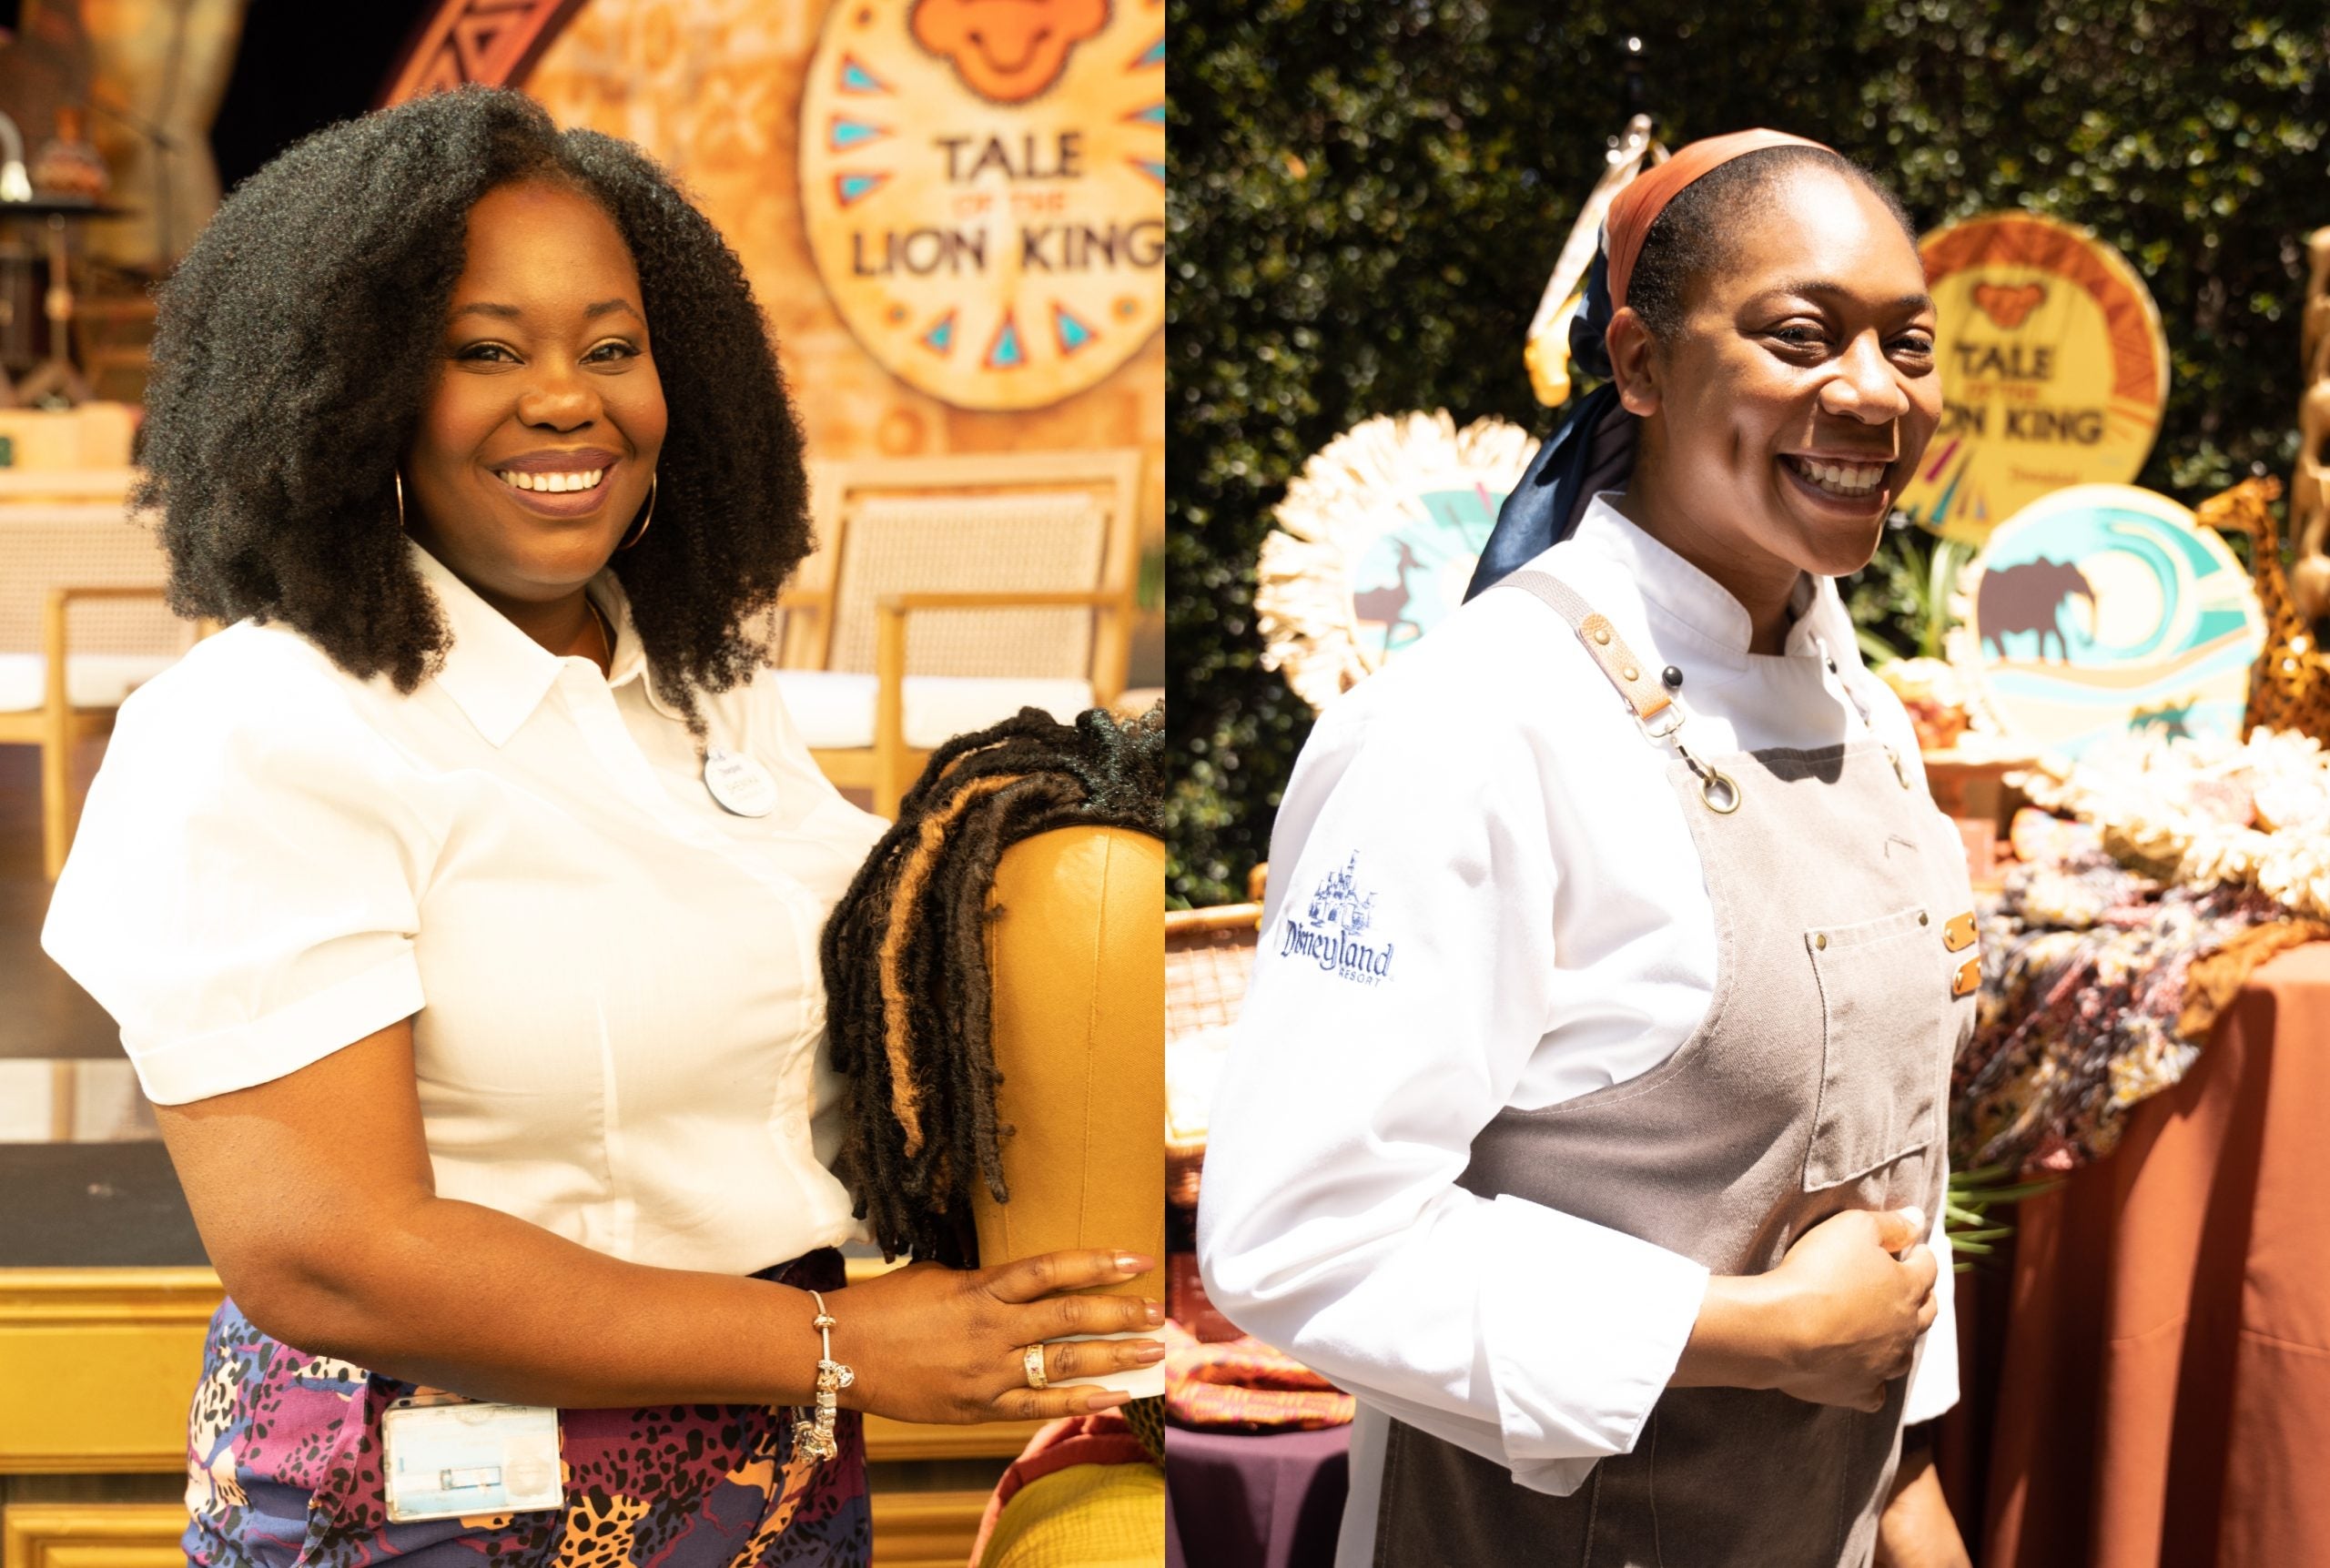 Meet The Black Women Helping Make Disneyland's "Tale of the Lion King" A Masterpiece